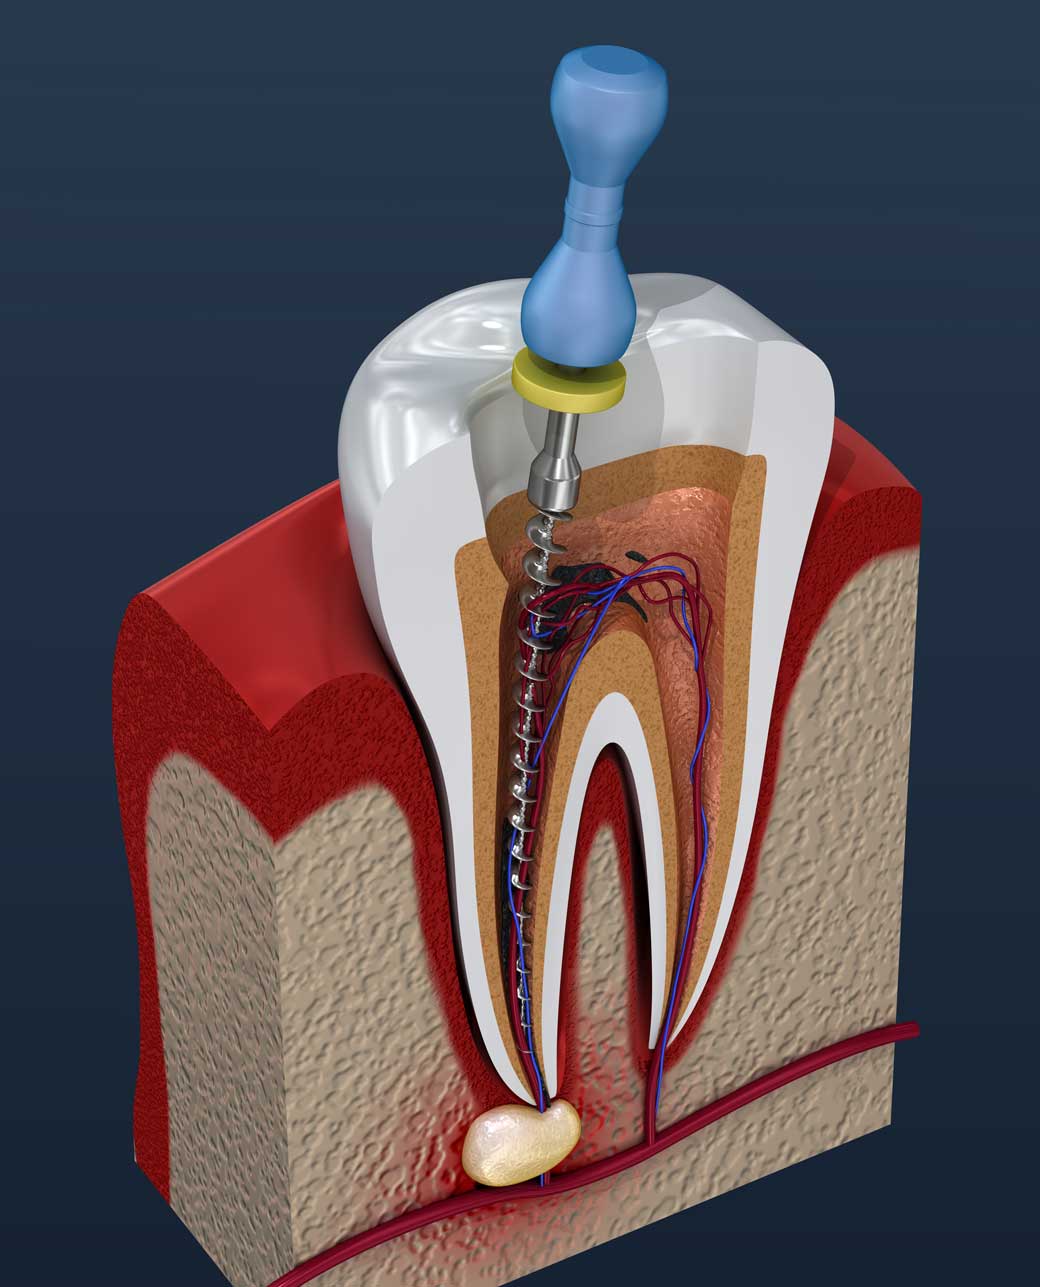 Root canal model